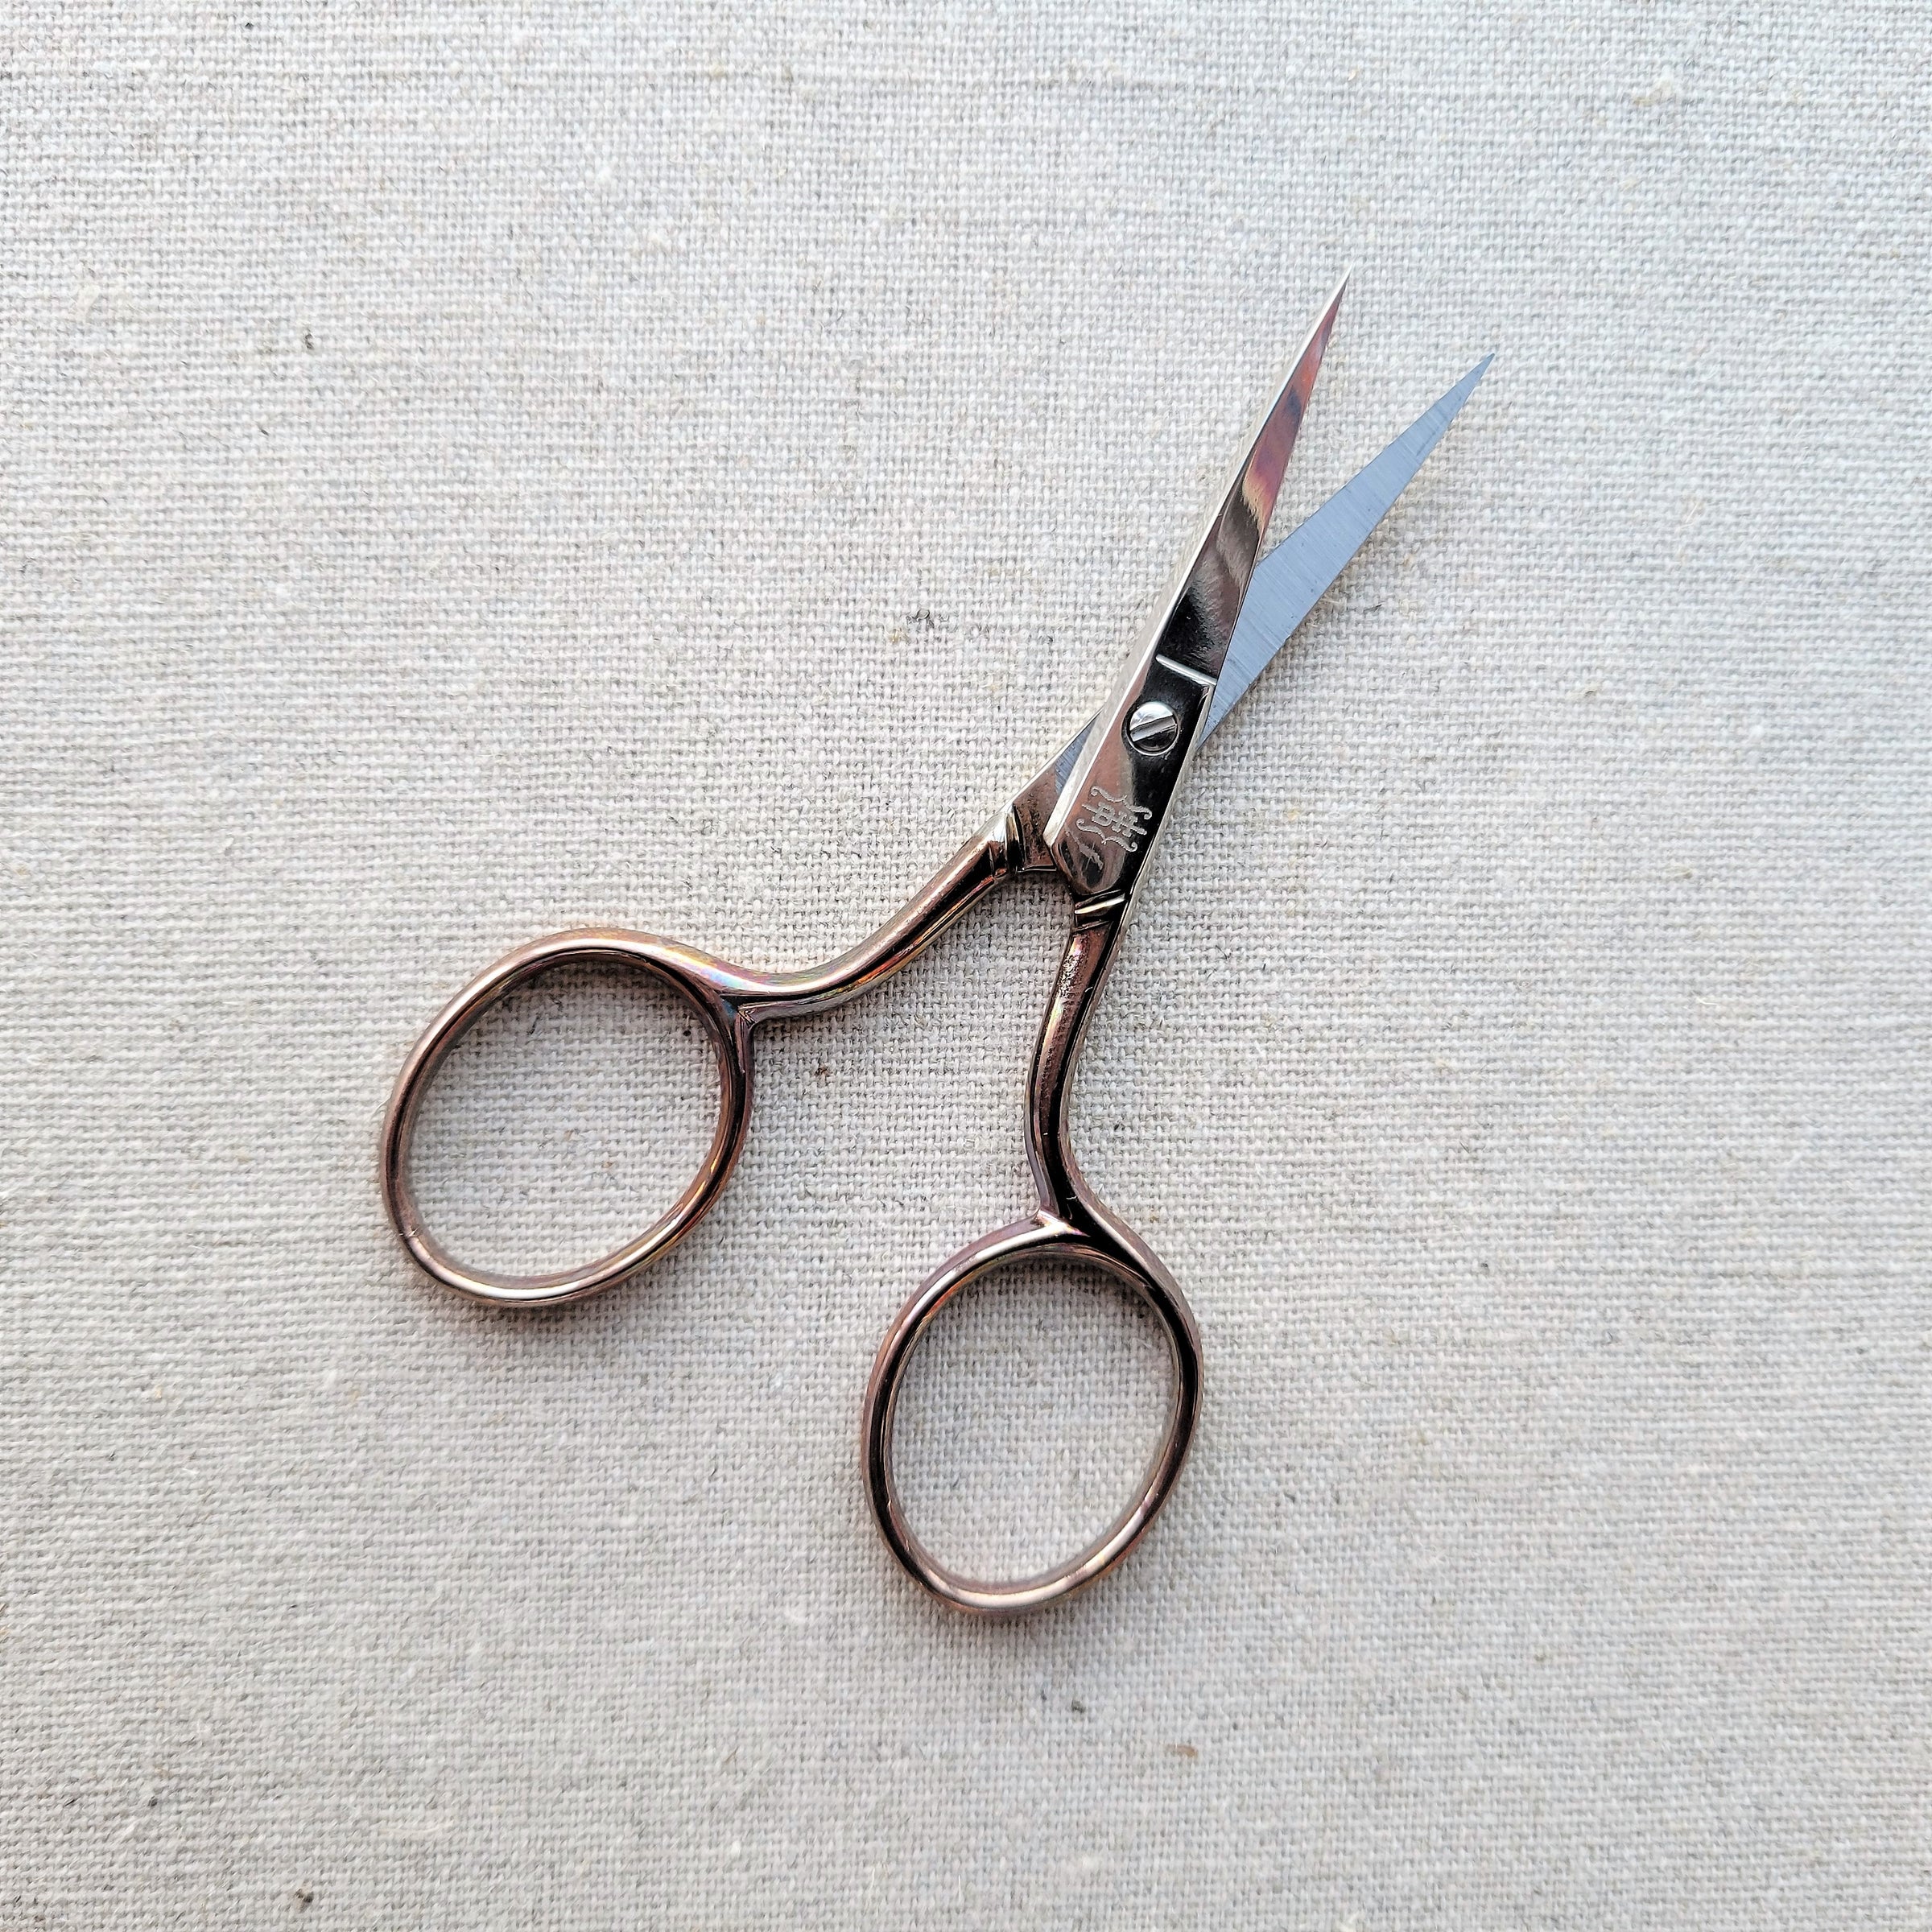 Embroidery Scissors - 24-Karat Gold Plated From Italy!